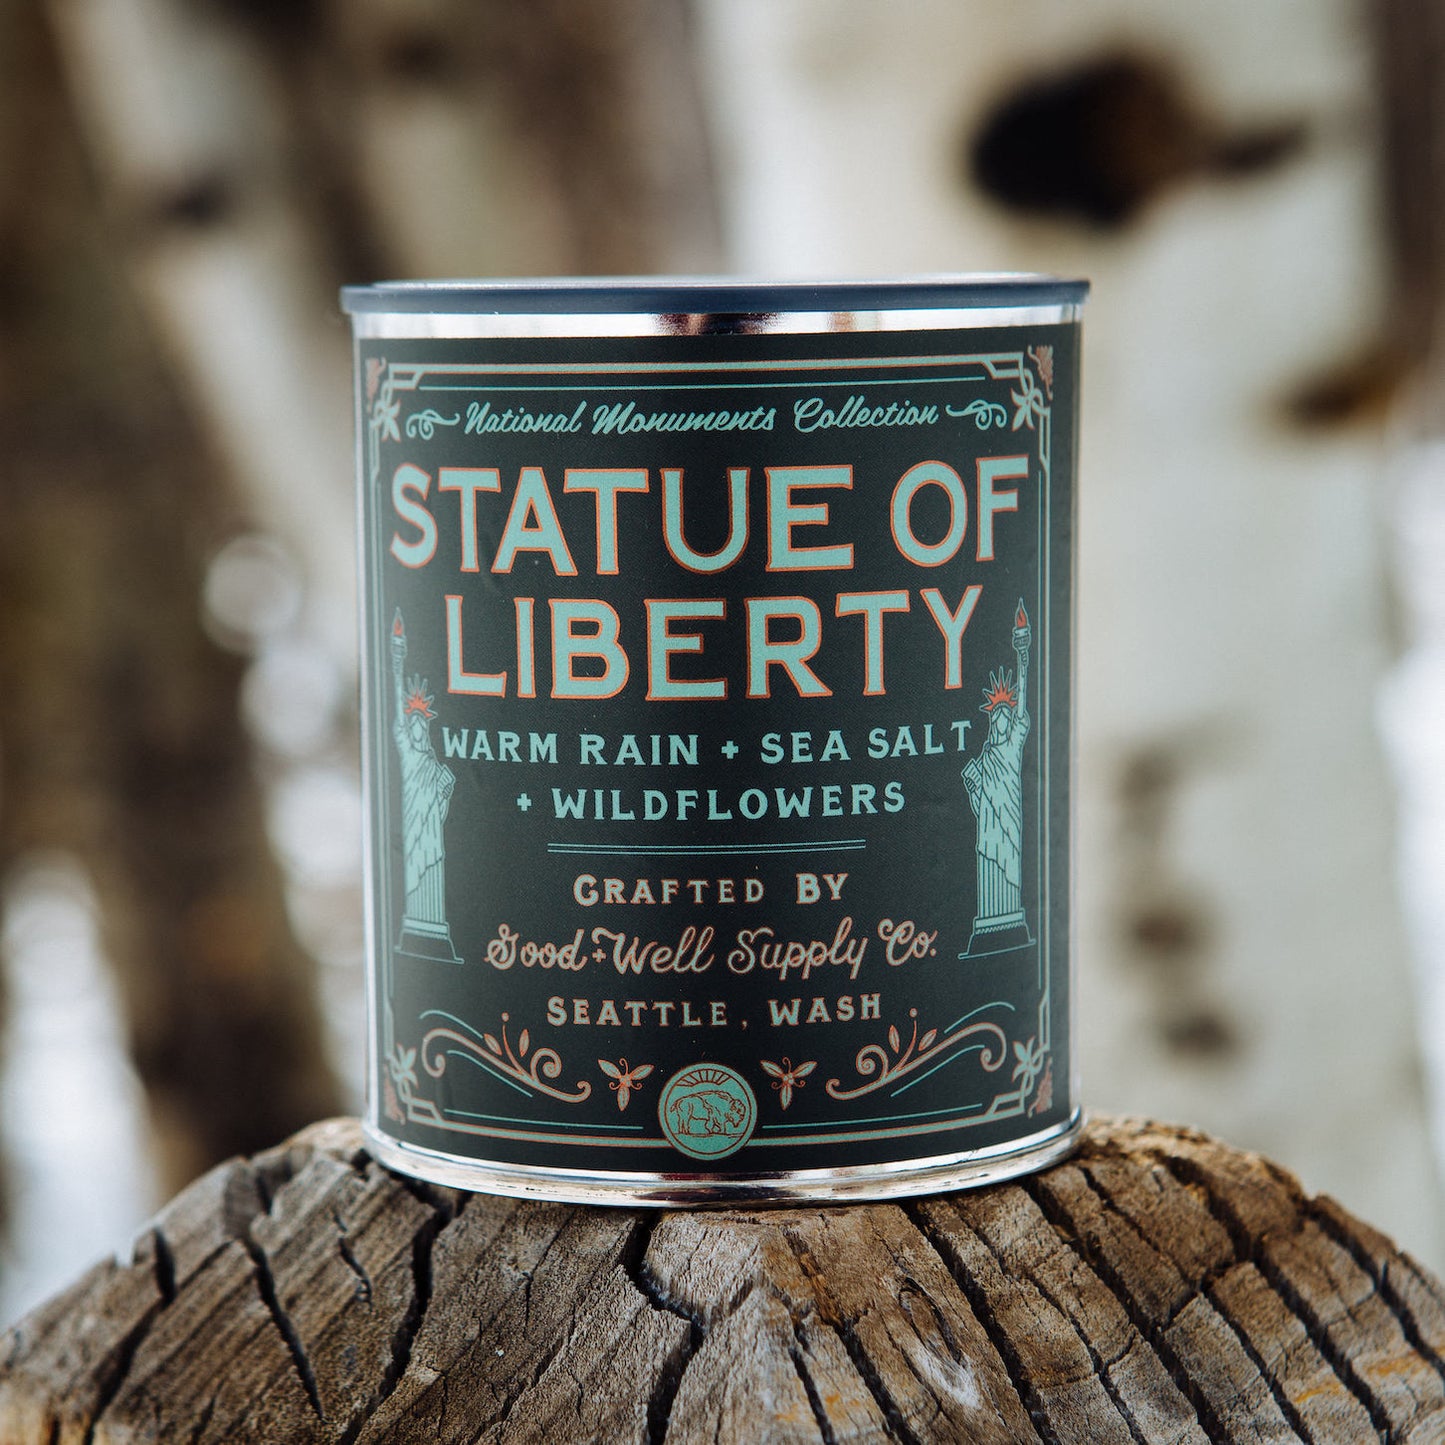 Statue of Liberty - 50% OFF